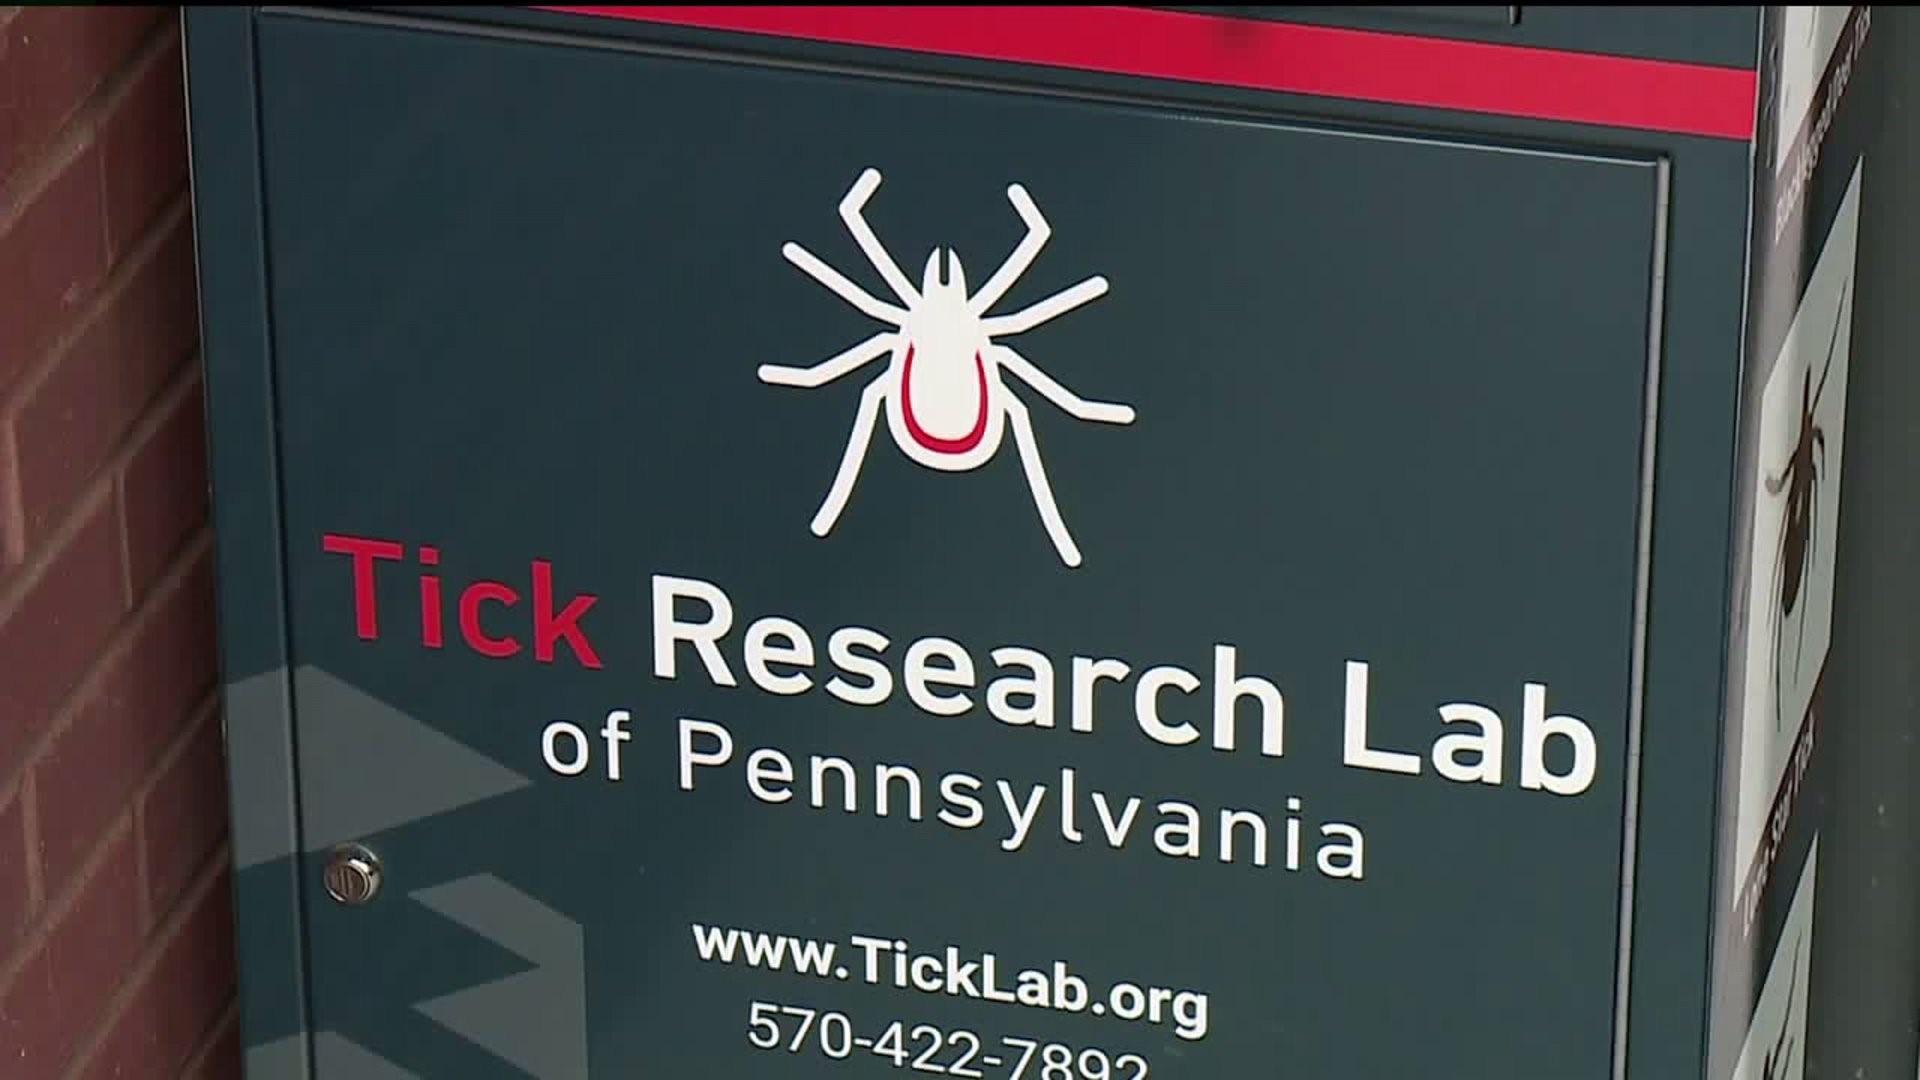 Tick Research Center Hopes For More Funding